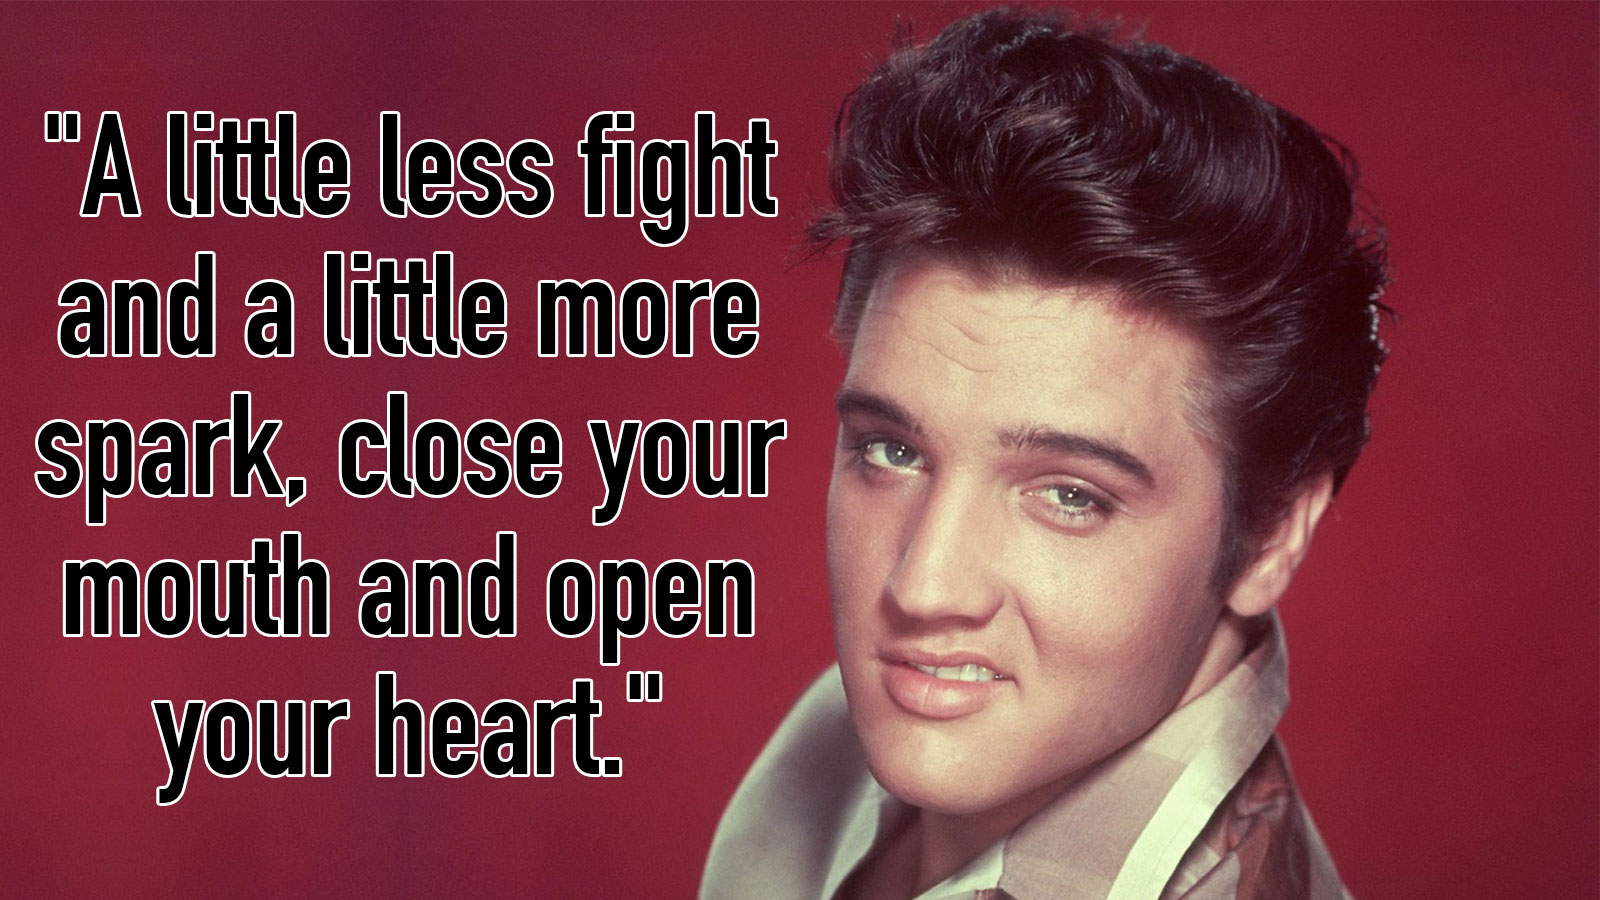 Can You Guess Which Elvis Presley Song This Lyric Is From? 31